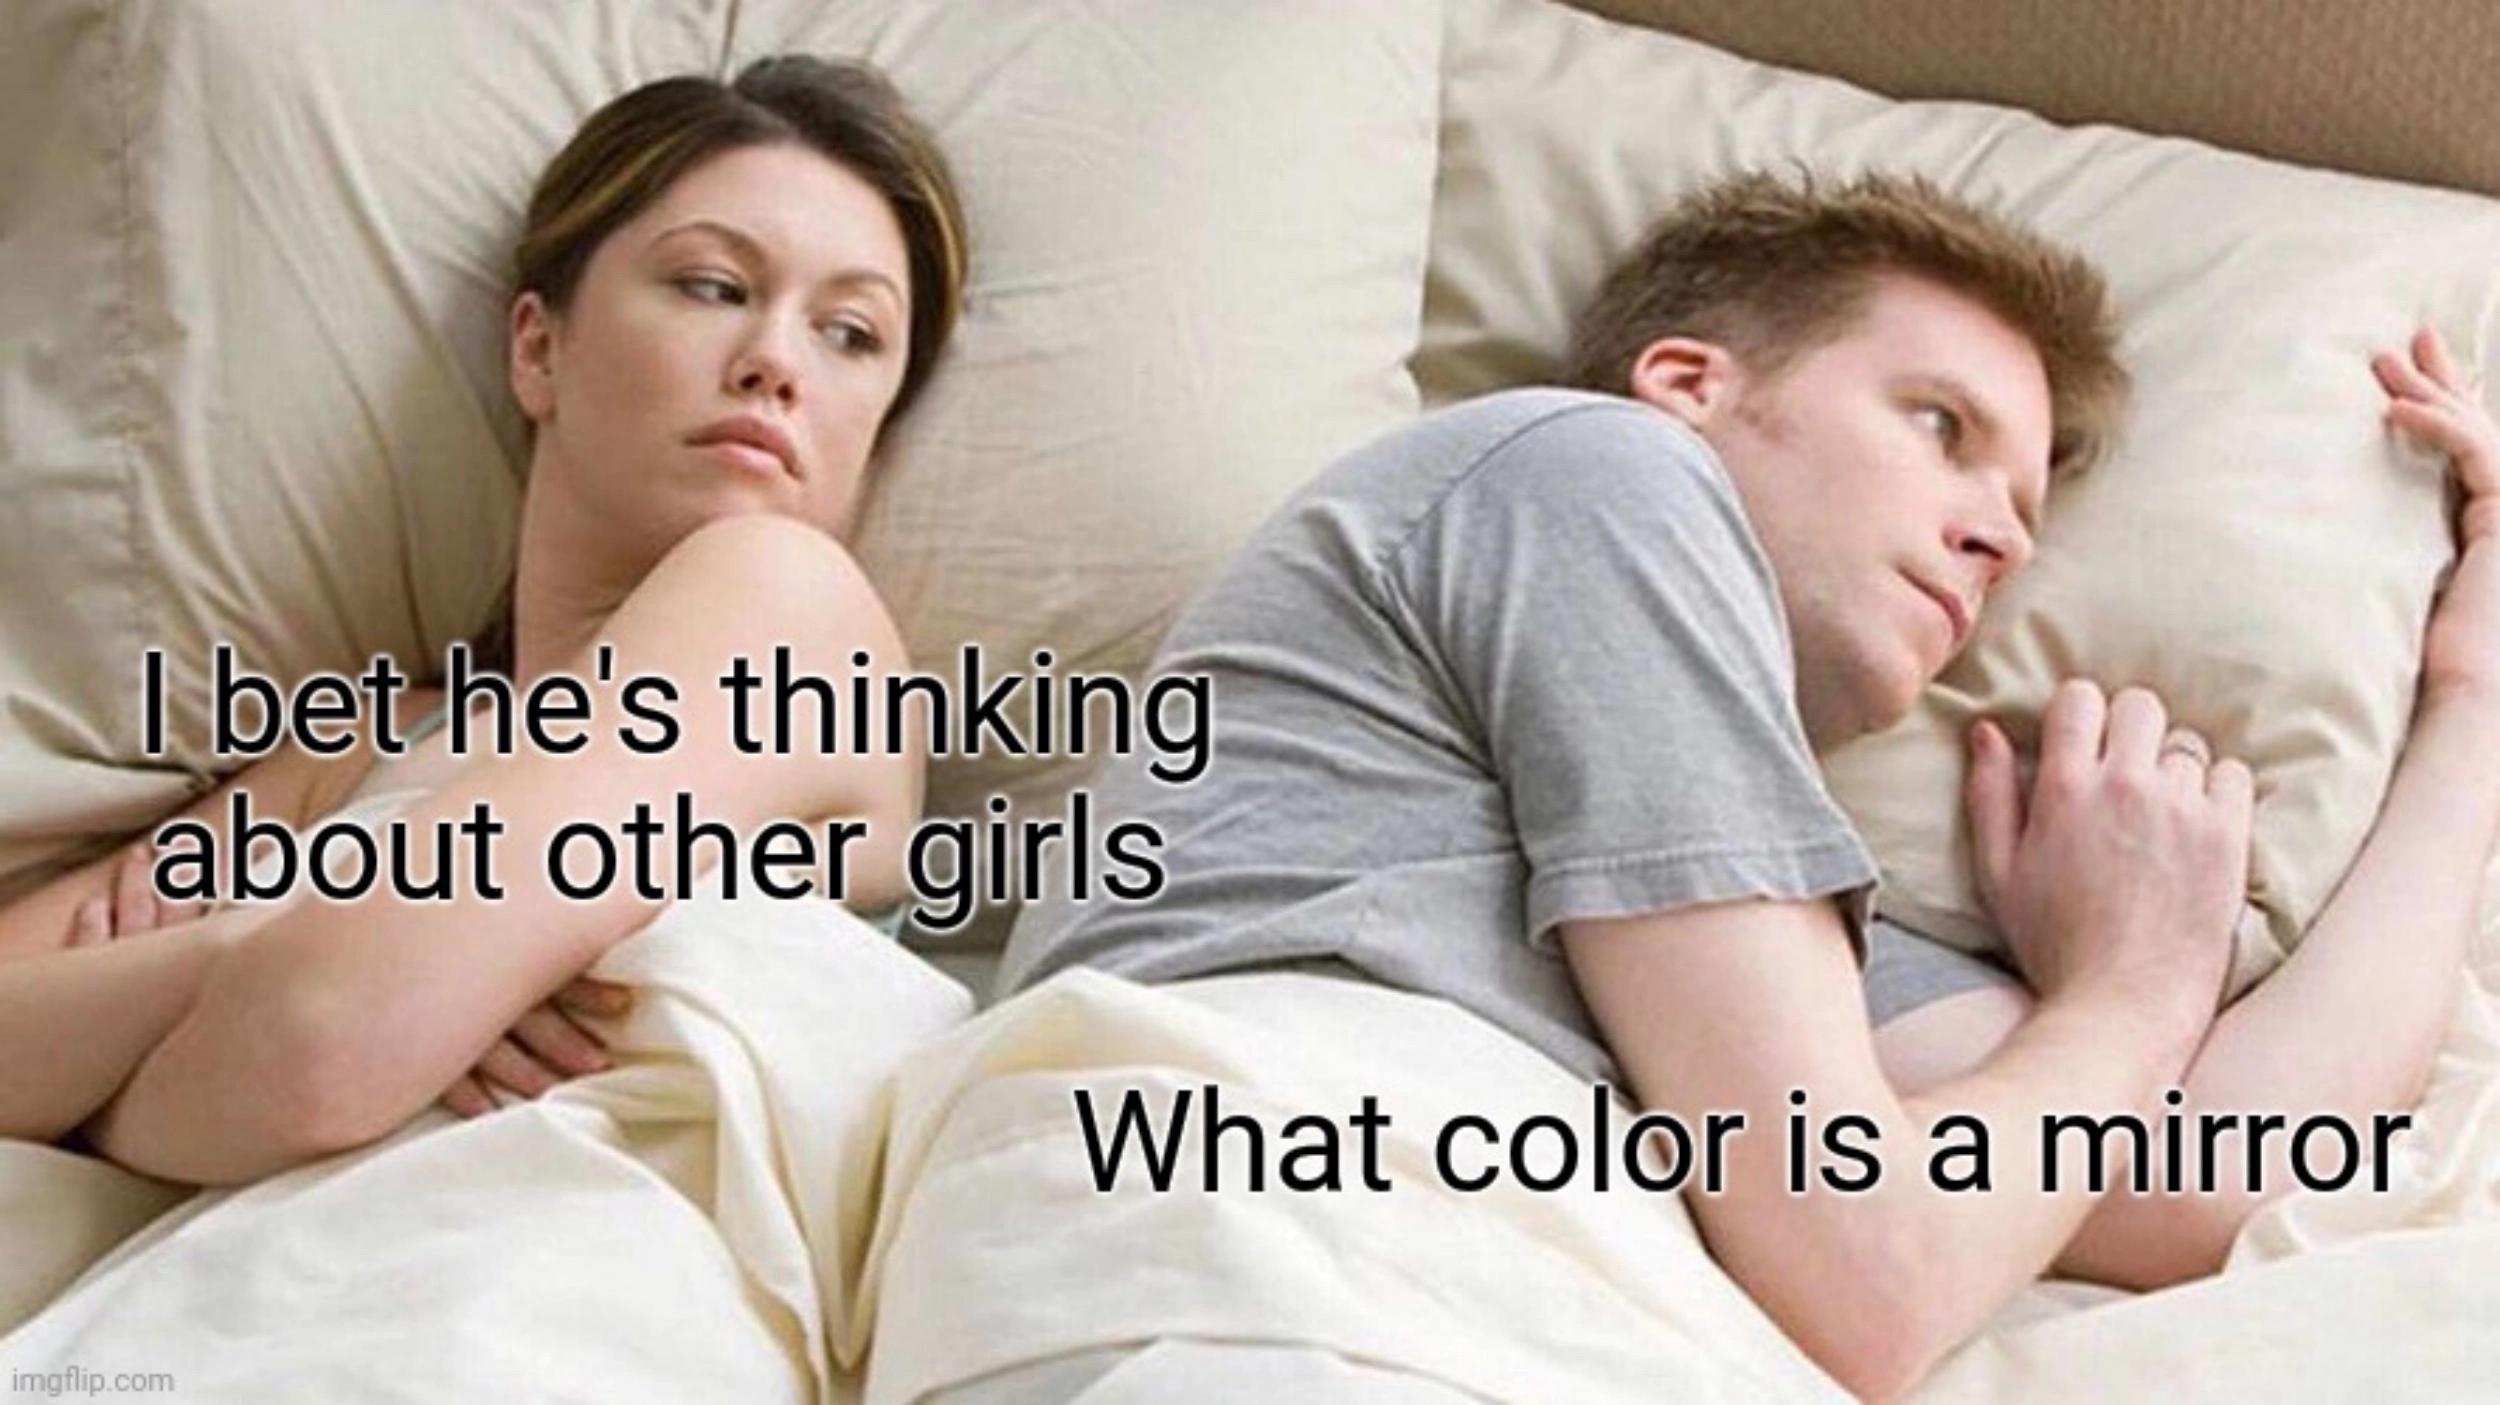 dank memes - husband cheating gif - I bet he's thinking about other girls imgflip.com What color is a mirror